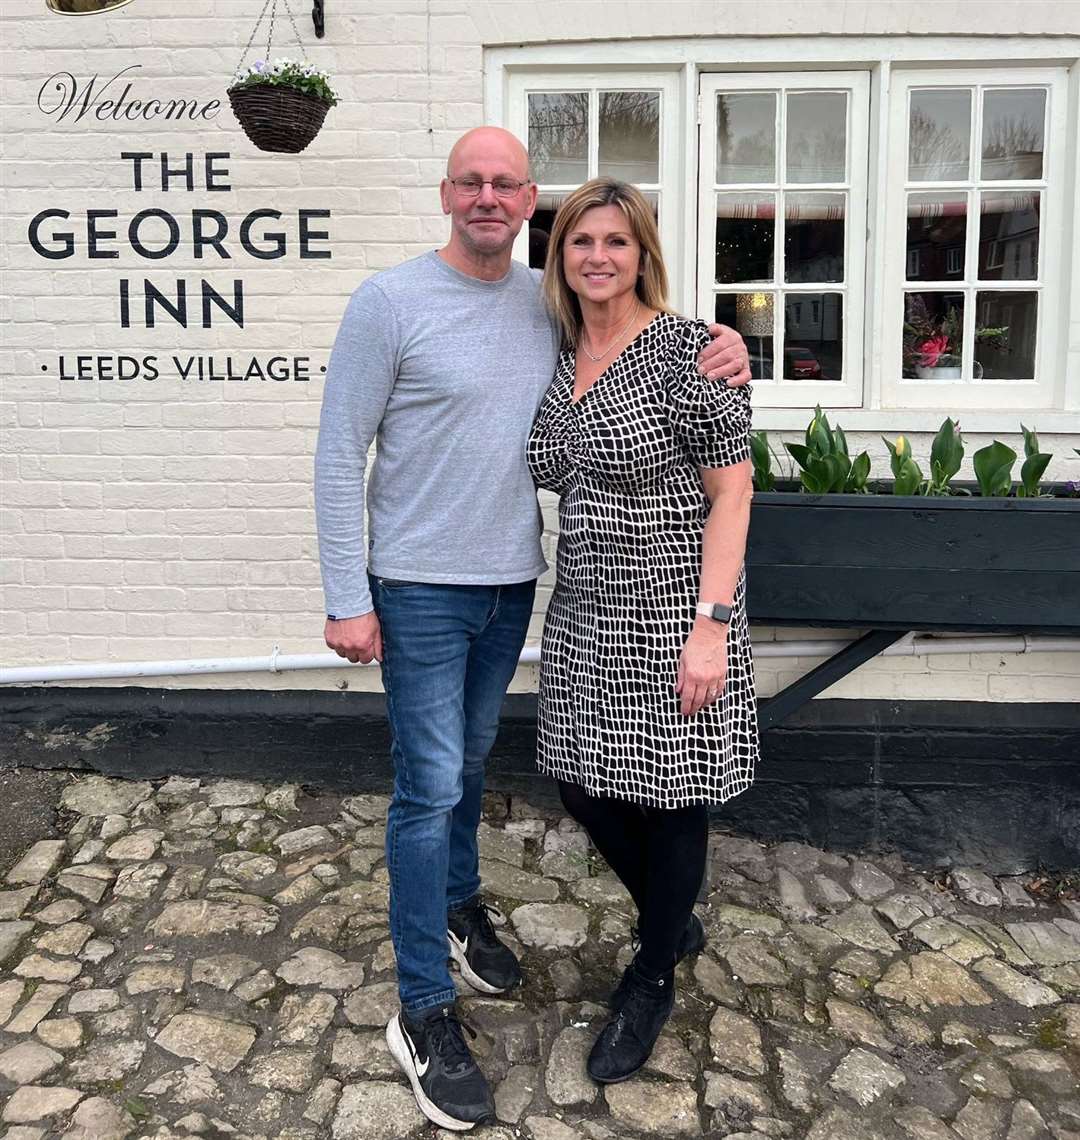 The landlords of the George Inn in Leeds, Jason and Debbie Tharp